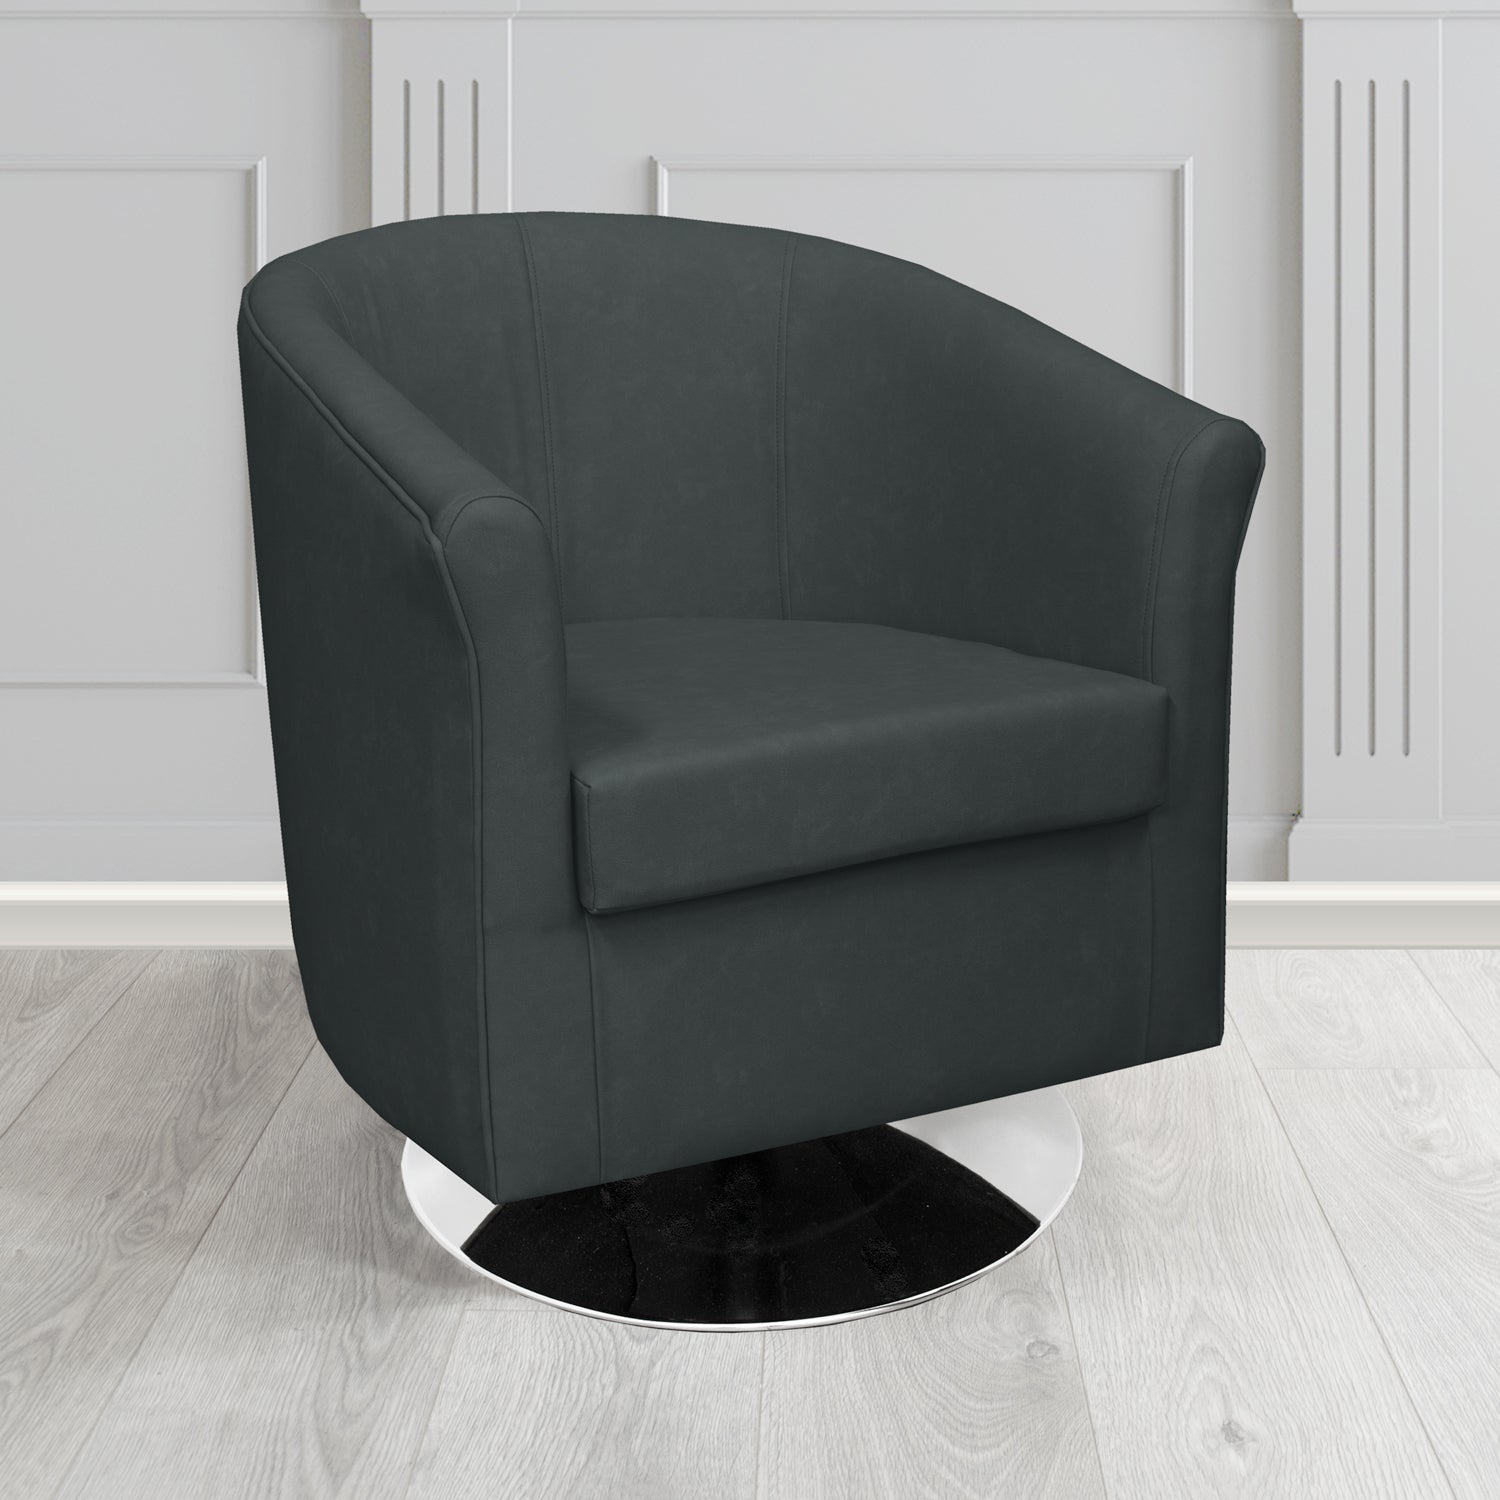 Tuscany Swivel Tub Chair in Infiniti Noir INF1863 Antimicrobial Crib 5 Faux Leather - The Tub Chair Shop